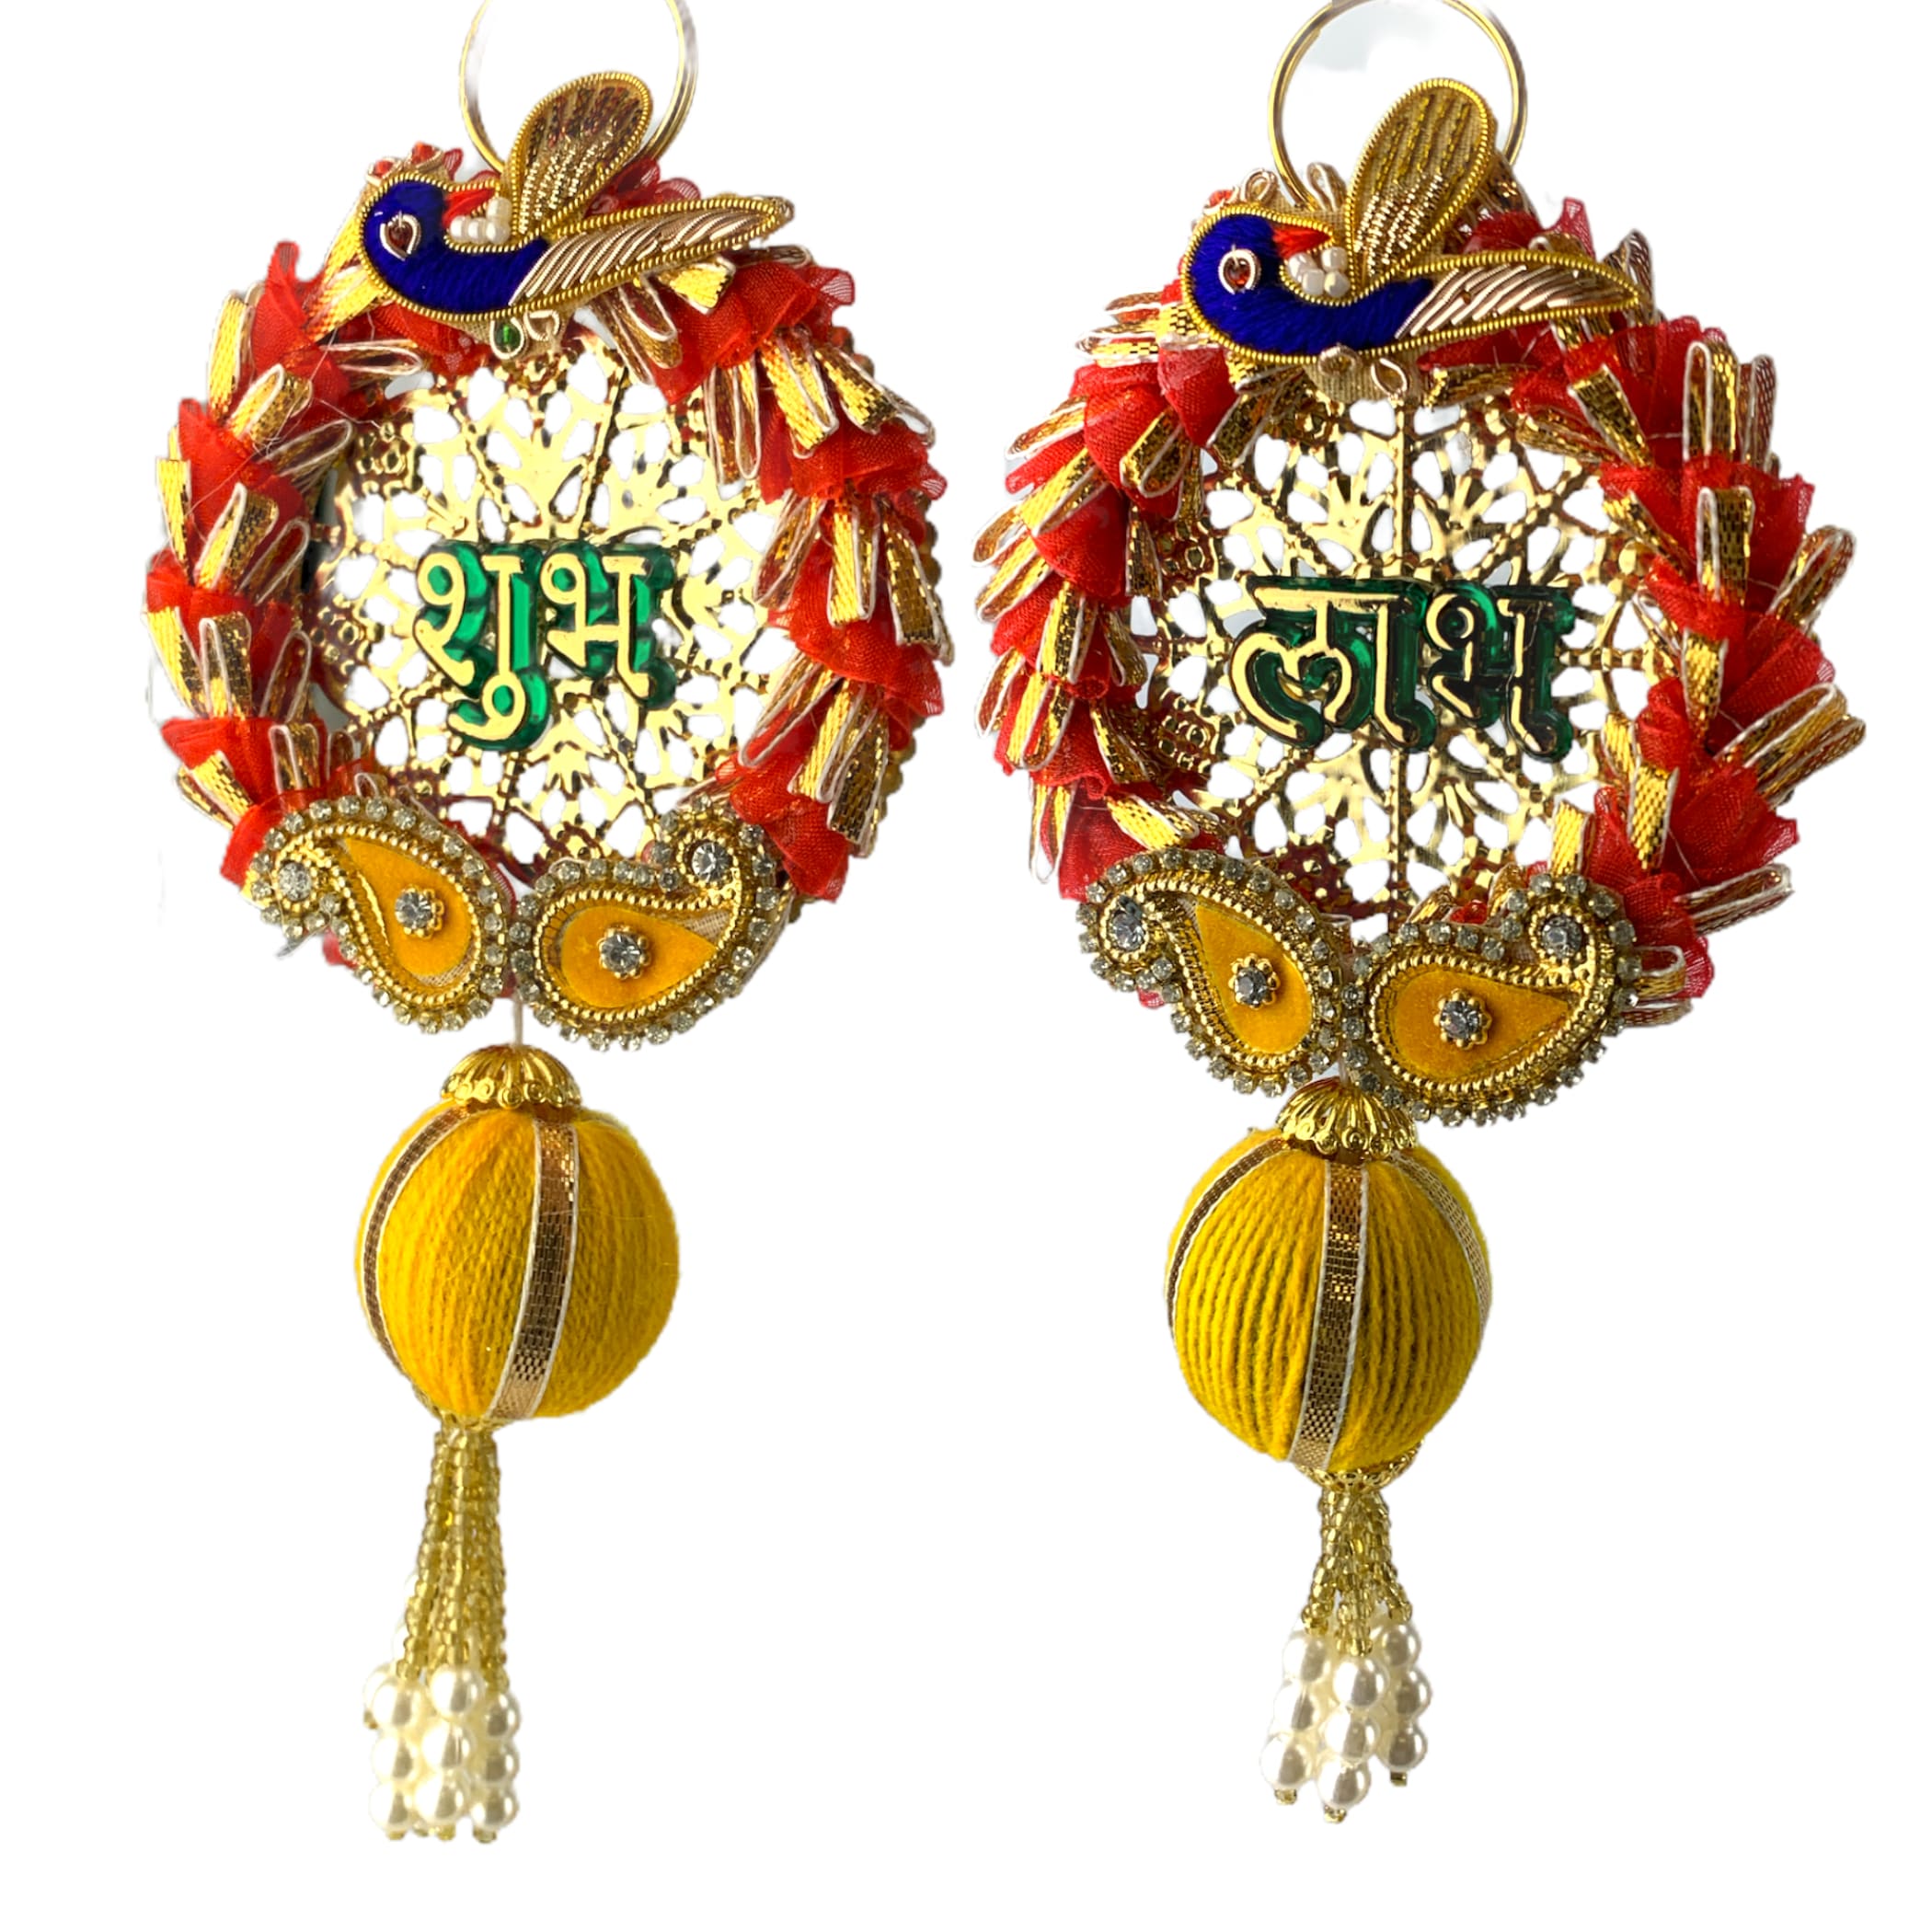 -donotlist-shubh labh pair shubhlabh diwali favor - do not